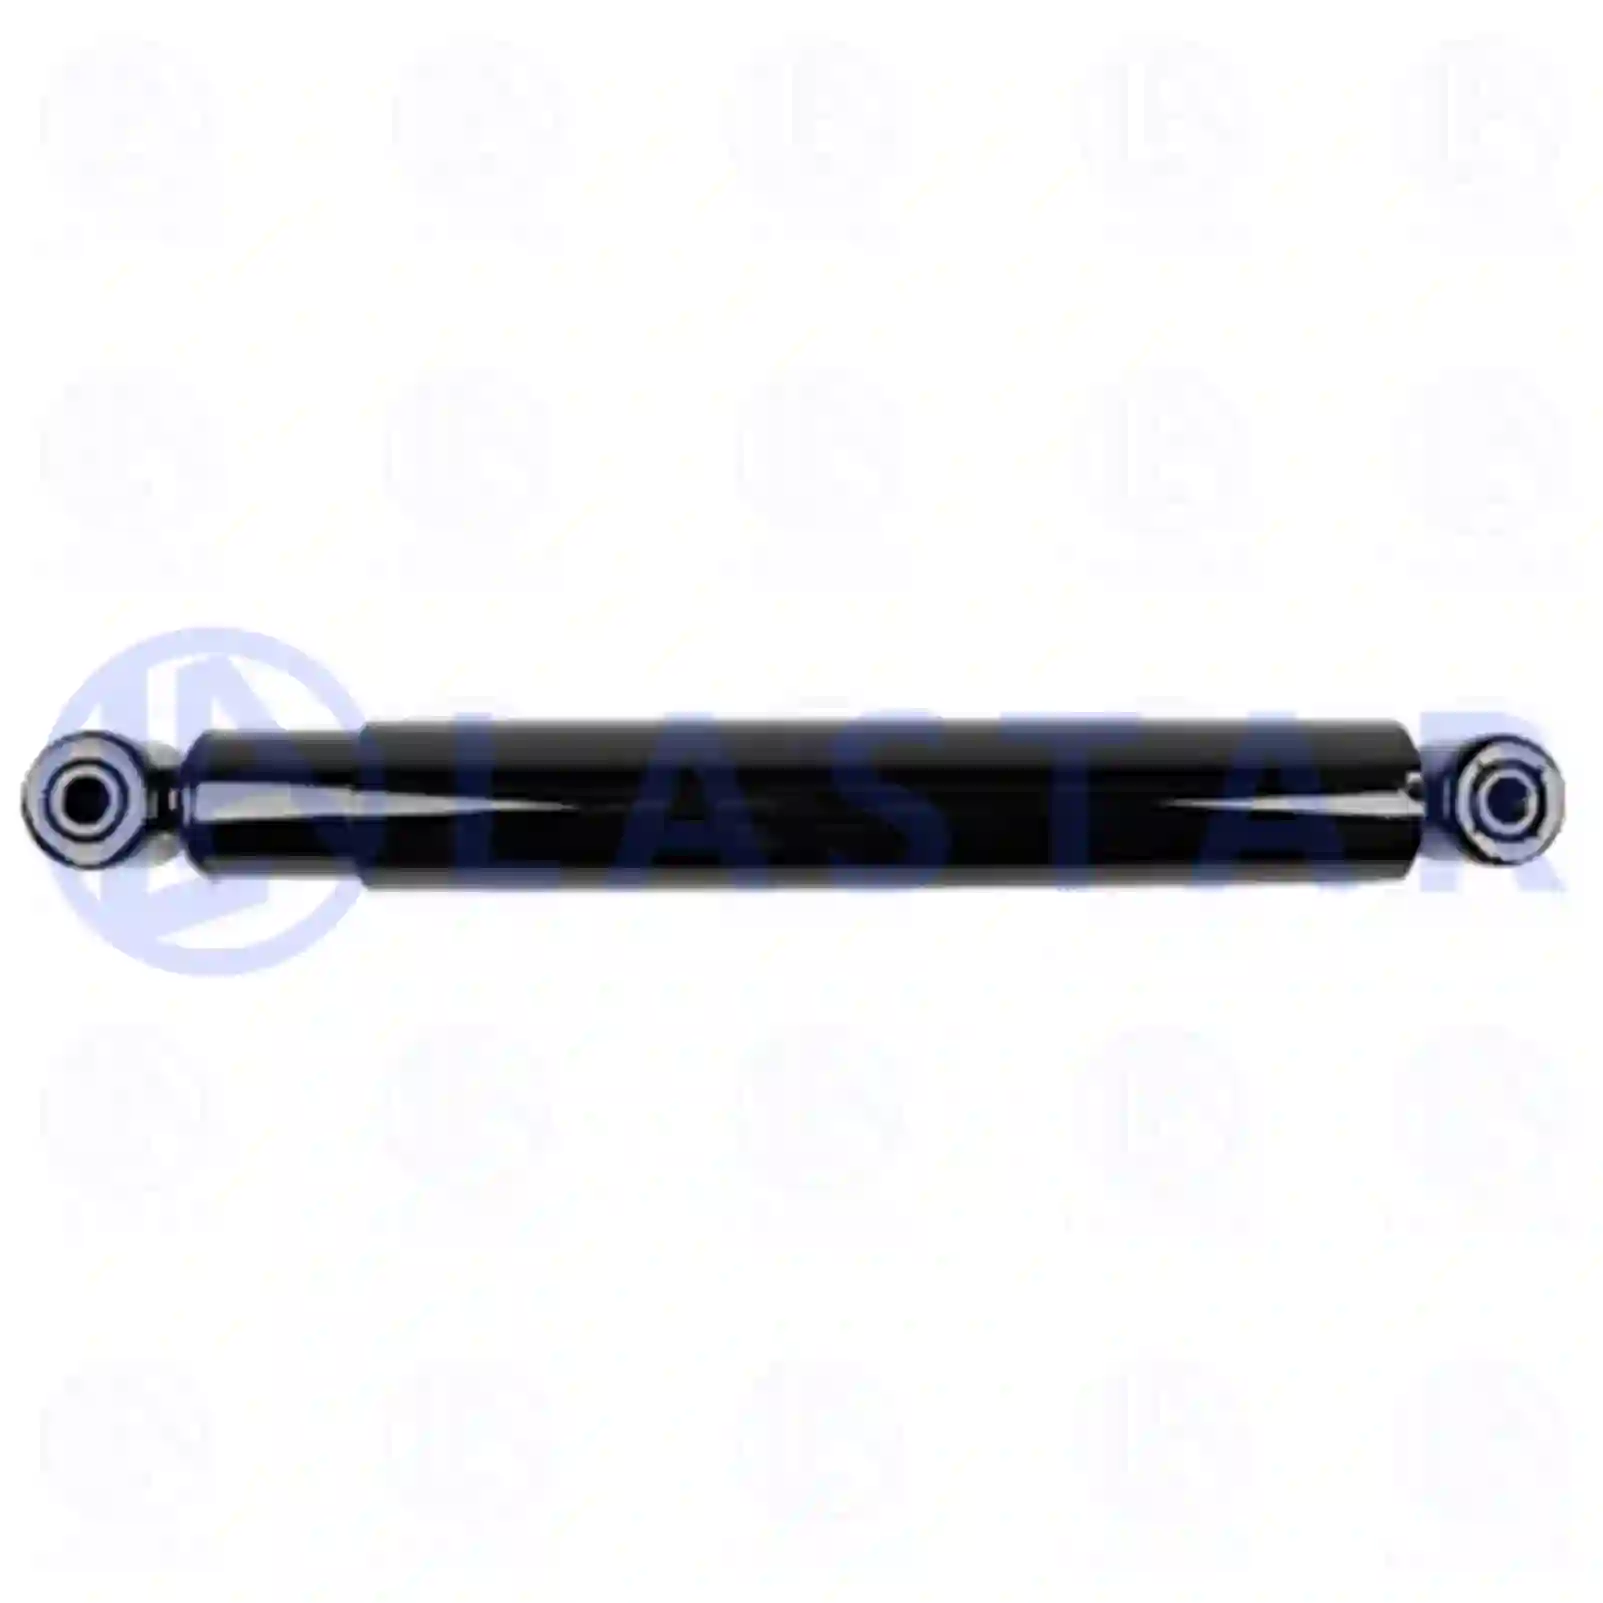 Shock absorber, 77727832, 0063231600, , , , ||  77727832 Lastar Spare Part | Truck Spare Parts, Auotomotive Spare Parts Shock absorber, 77727832, 0063231600, , , , ||  77727832 Lastar Spare Part | Truck Spare Parts, Auotomotive Spare Parts